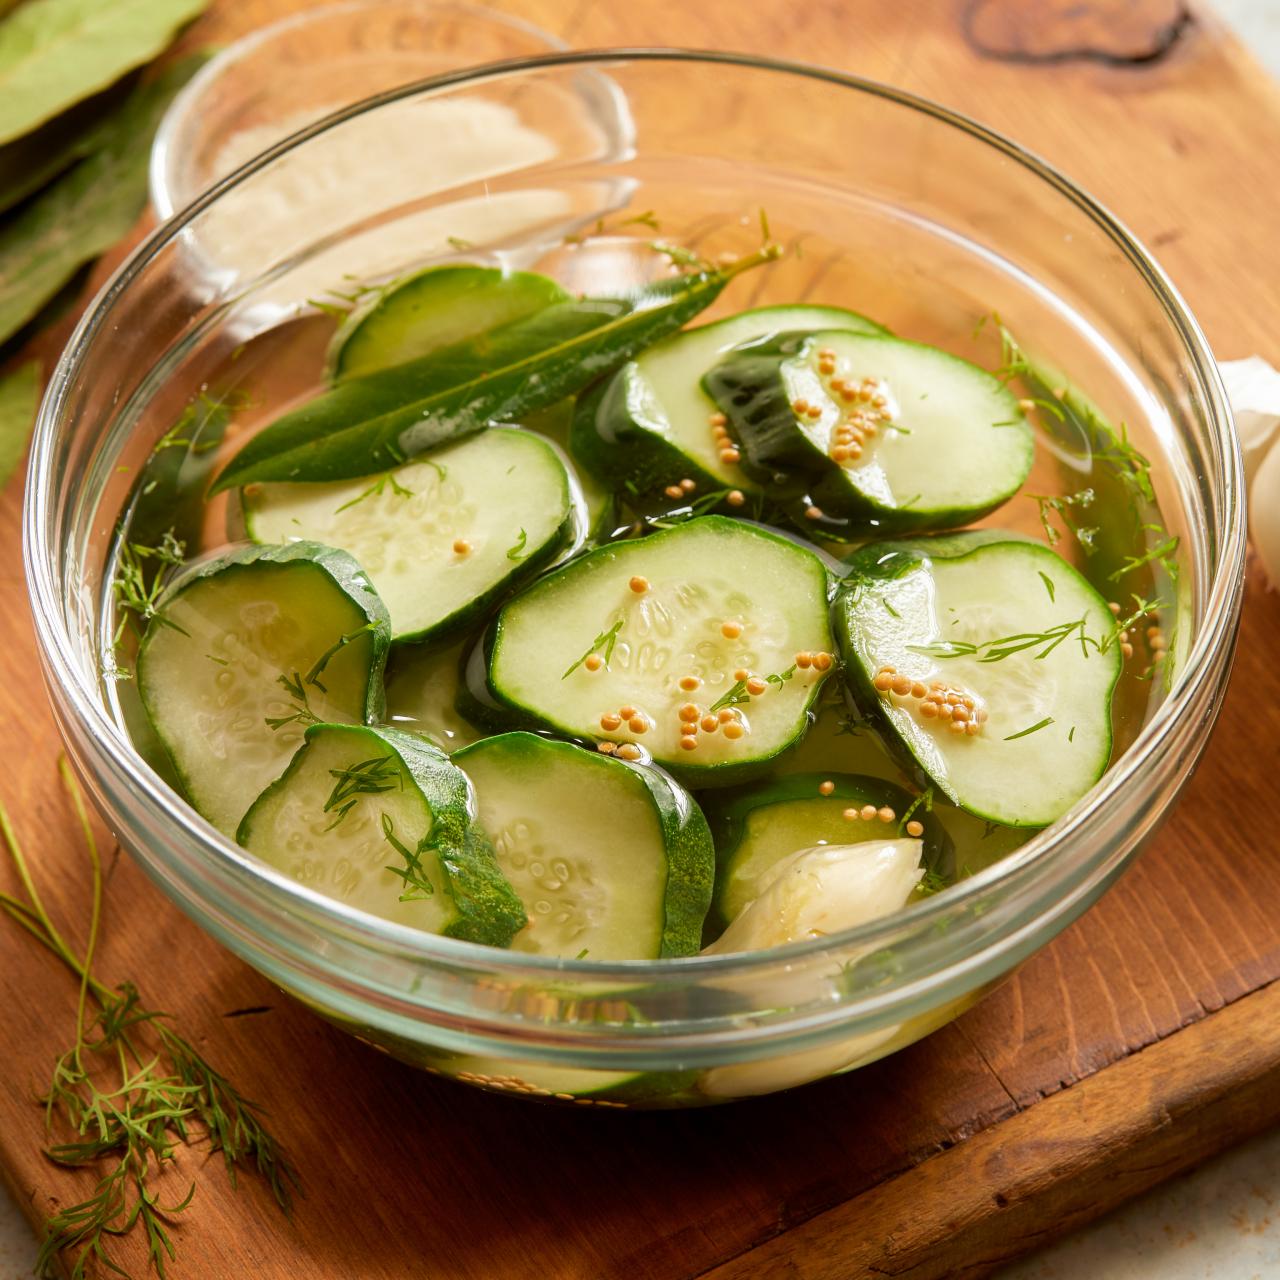 Rachael Ray Quick Pickle Recipe: Amp Up Your Flavor Game!